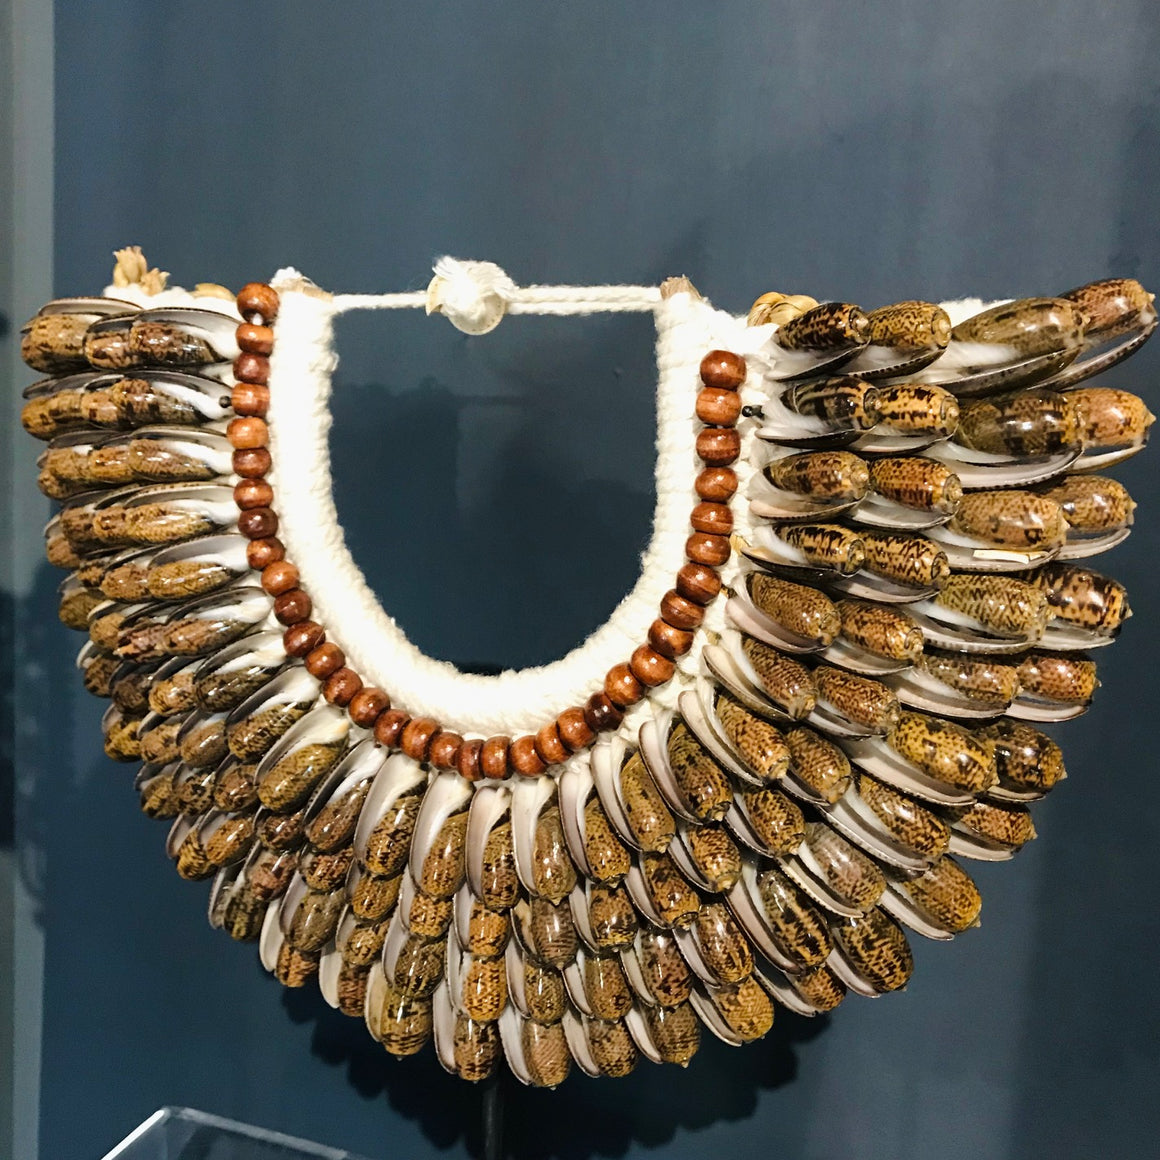 Decorative Shell necklaces from Papua New Guinea